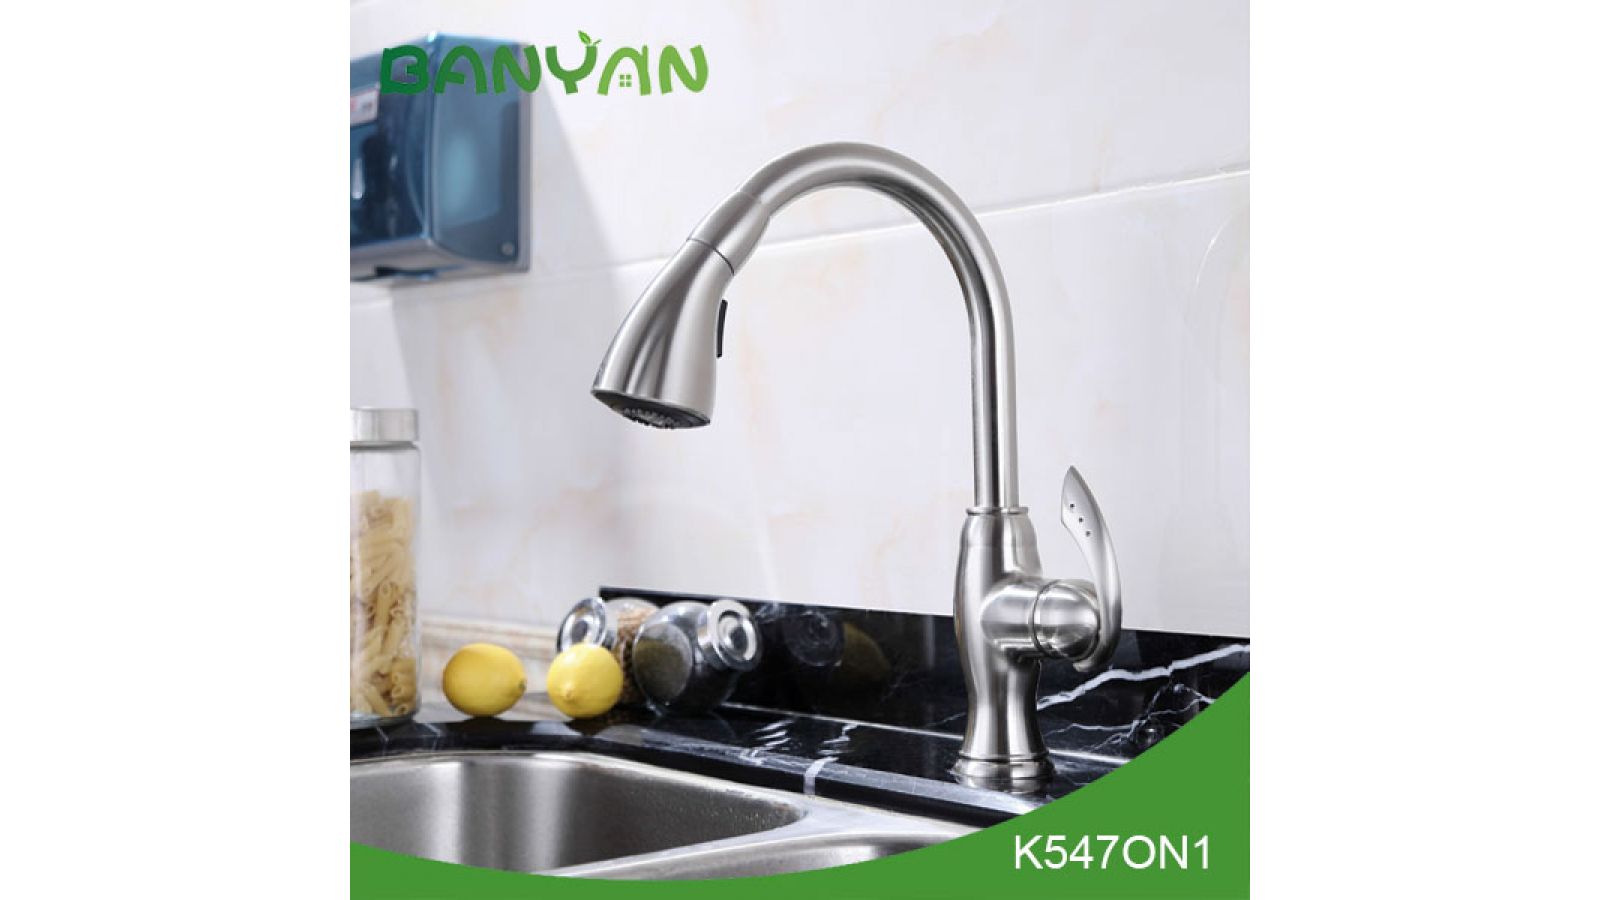 UPC pull out kitchen faucet - Banyan